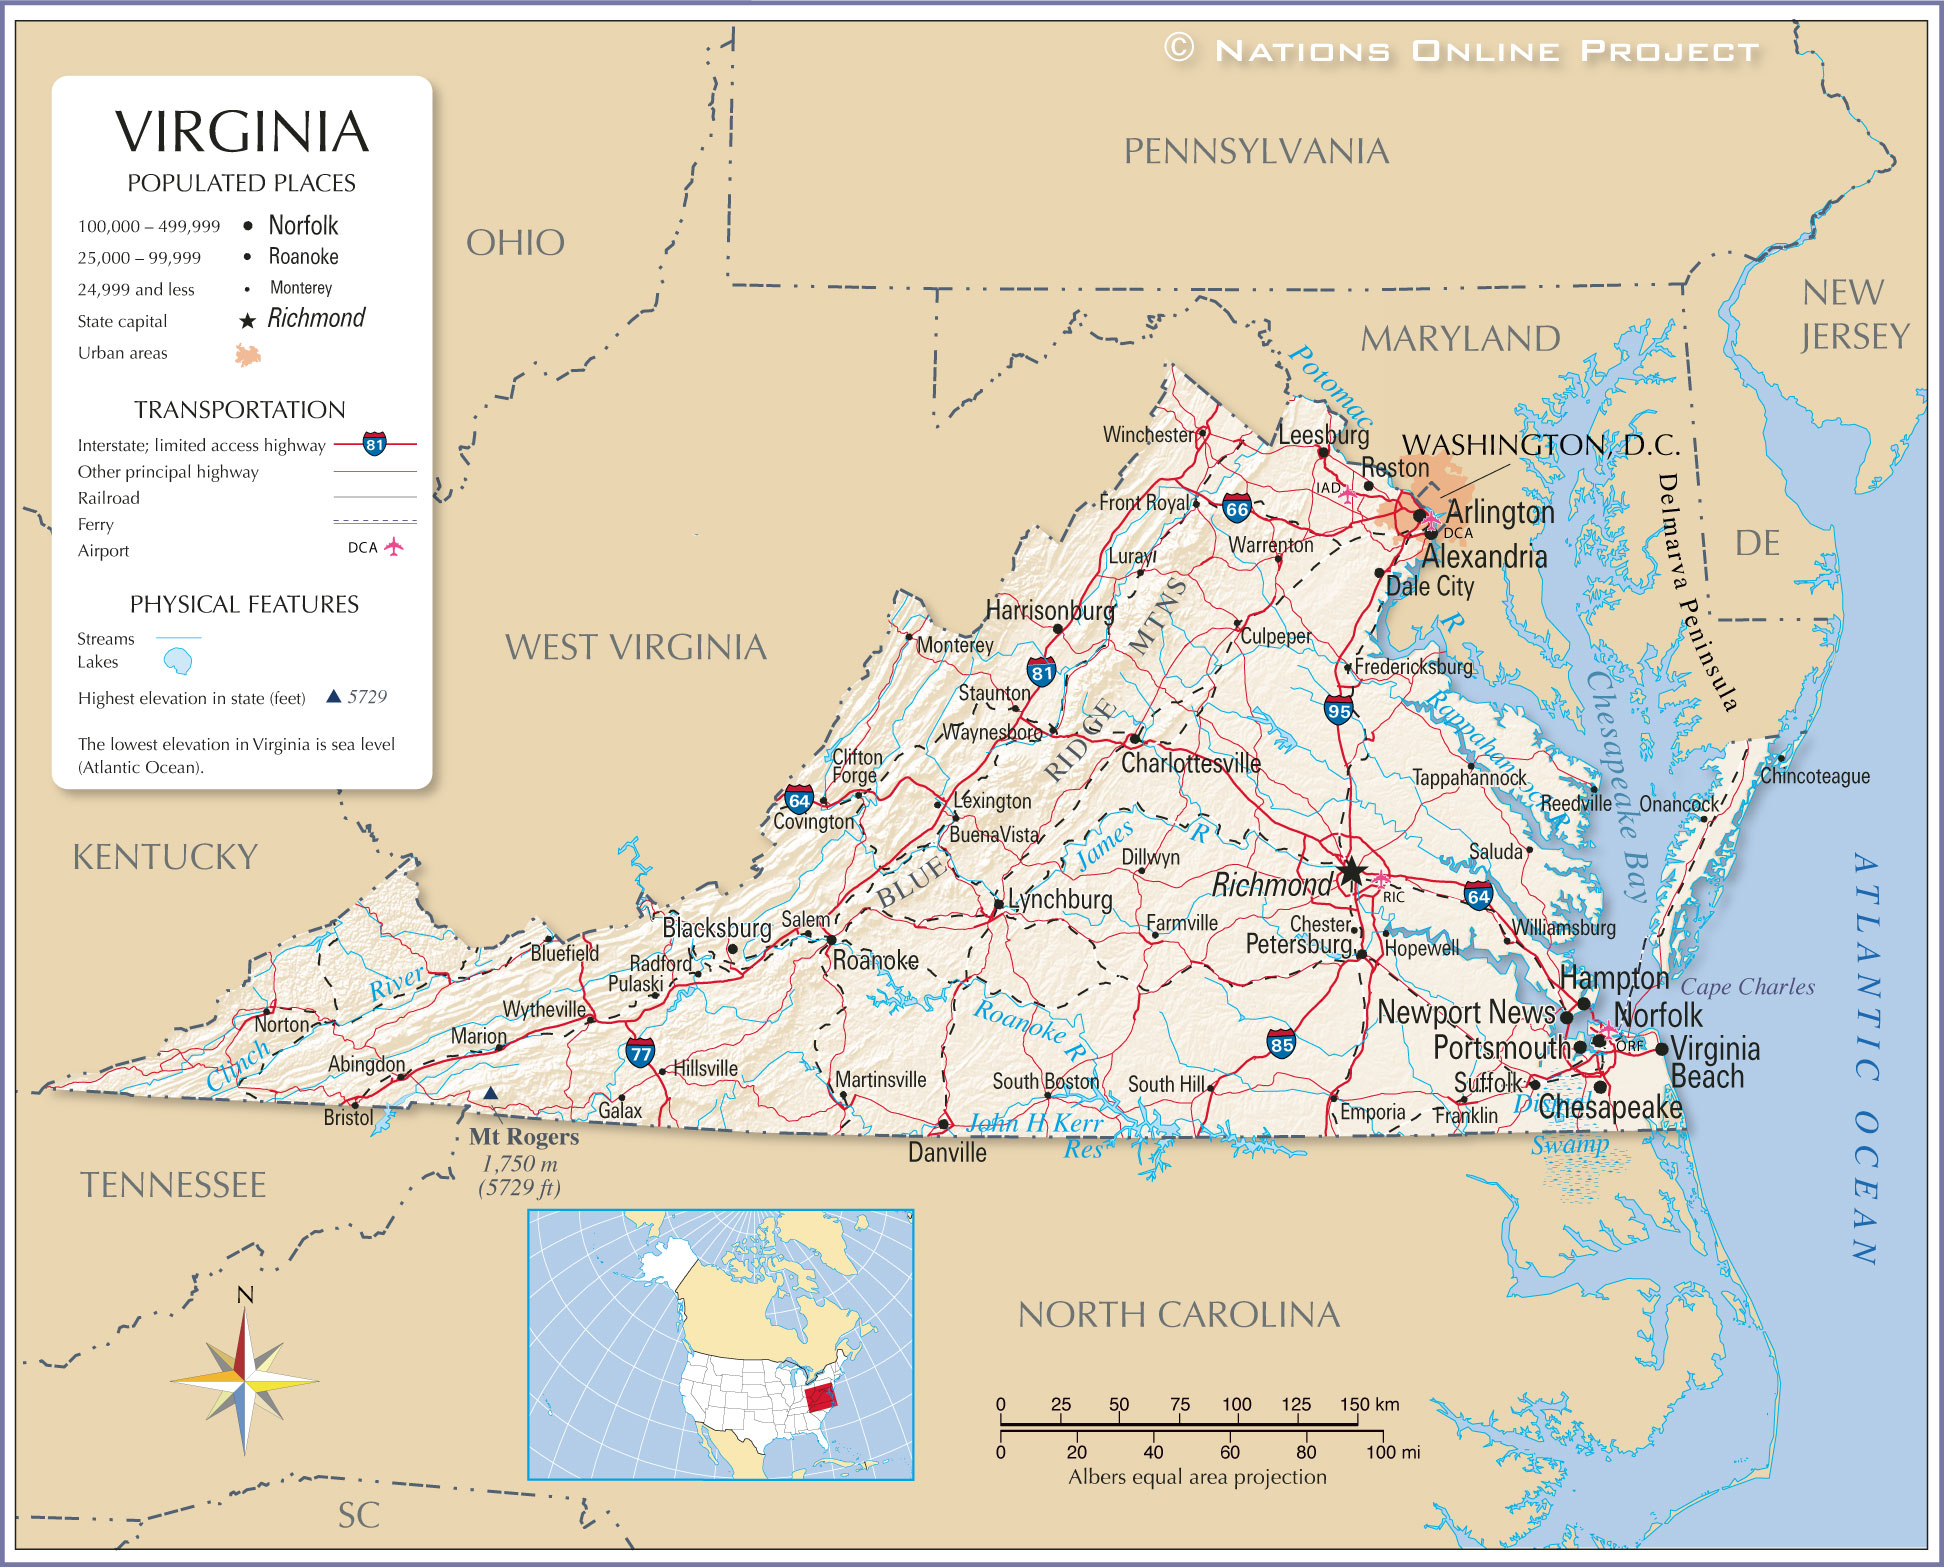 Map of the Commonwealth of Virginia, USA - Nations Online Project